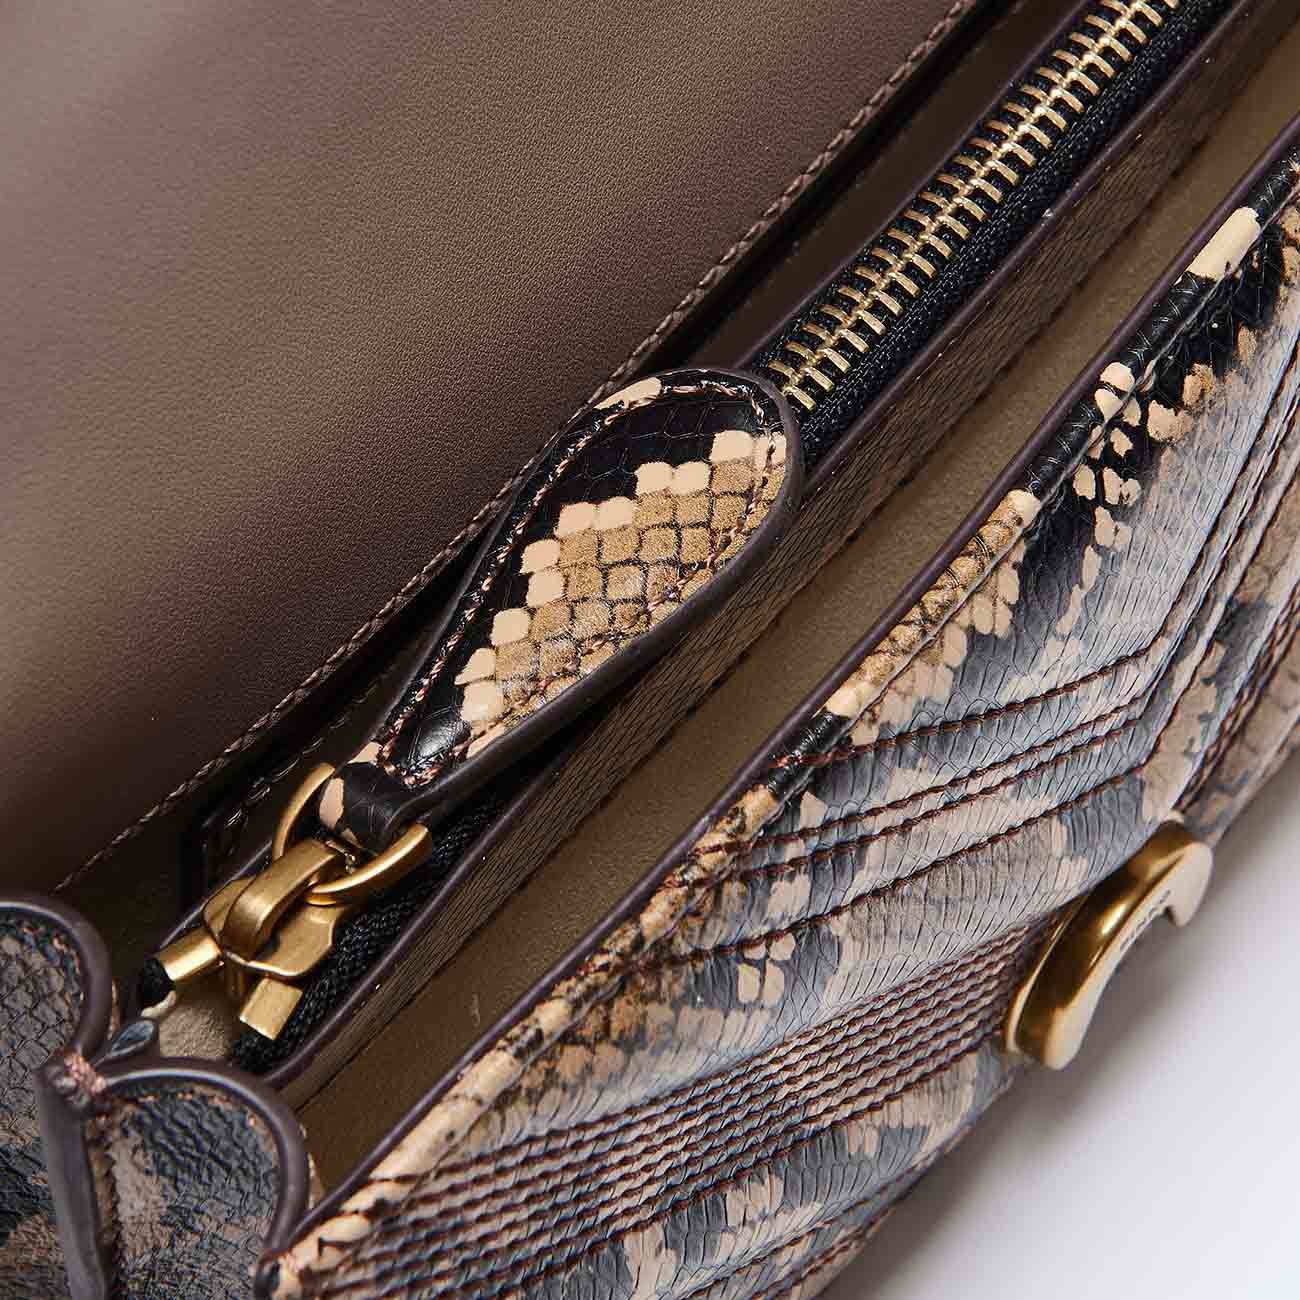 Trunck Chain Wallet Python - Wallets and Small Leather Goods